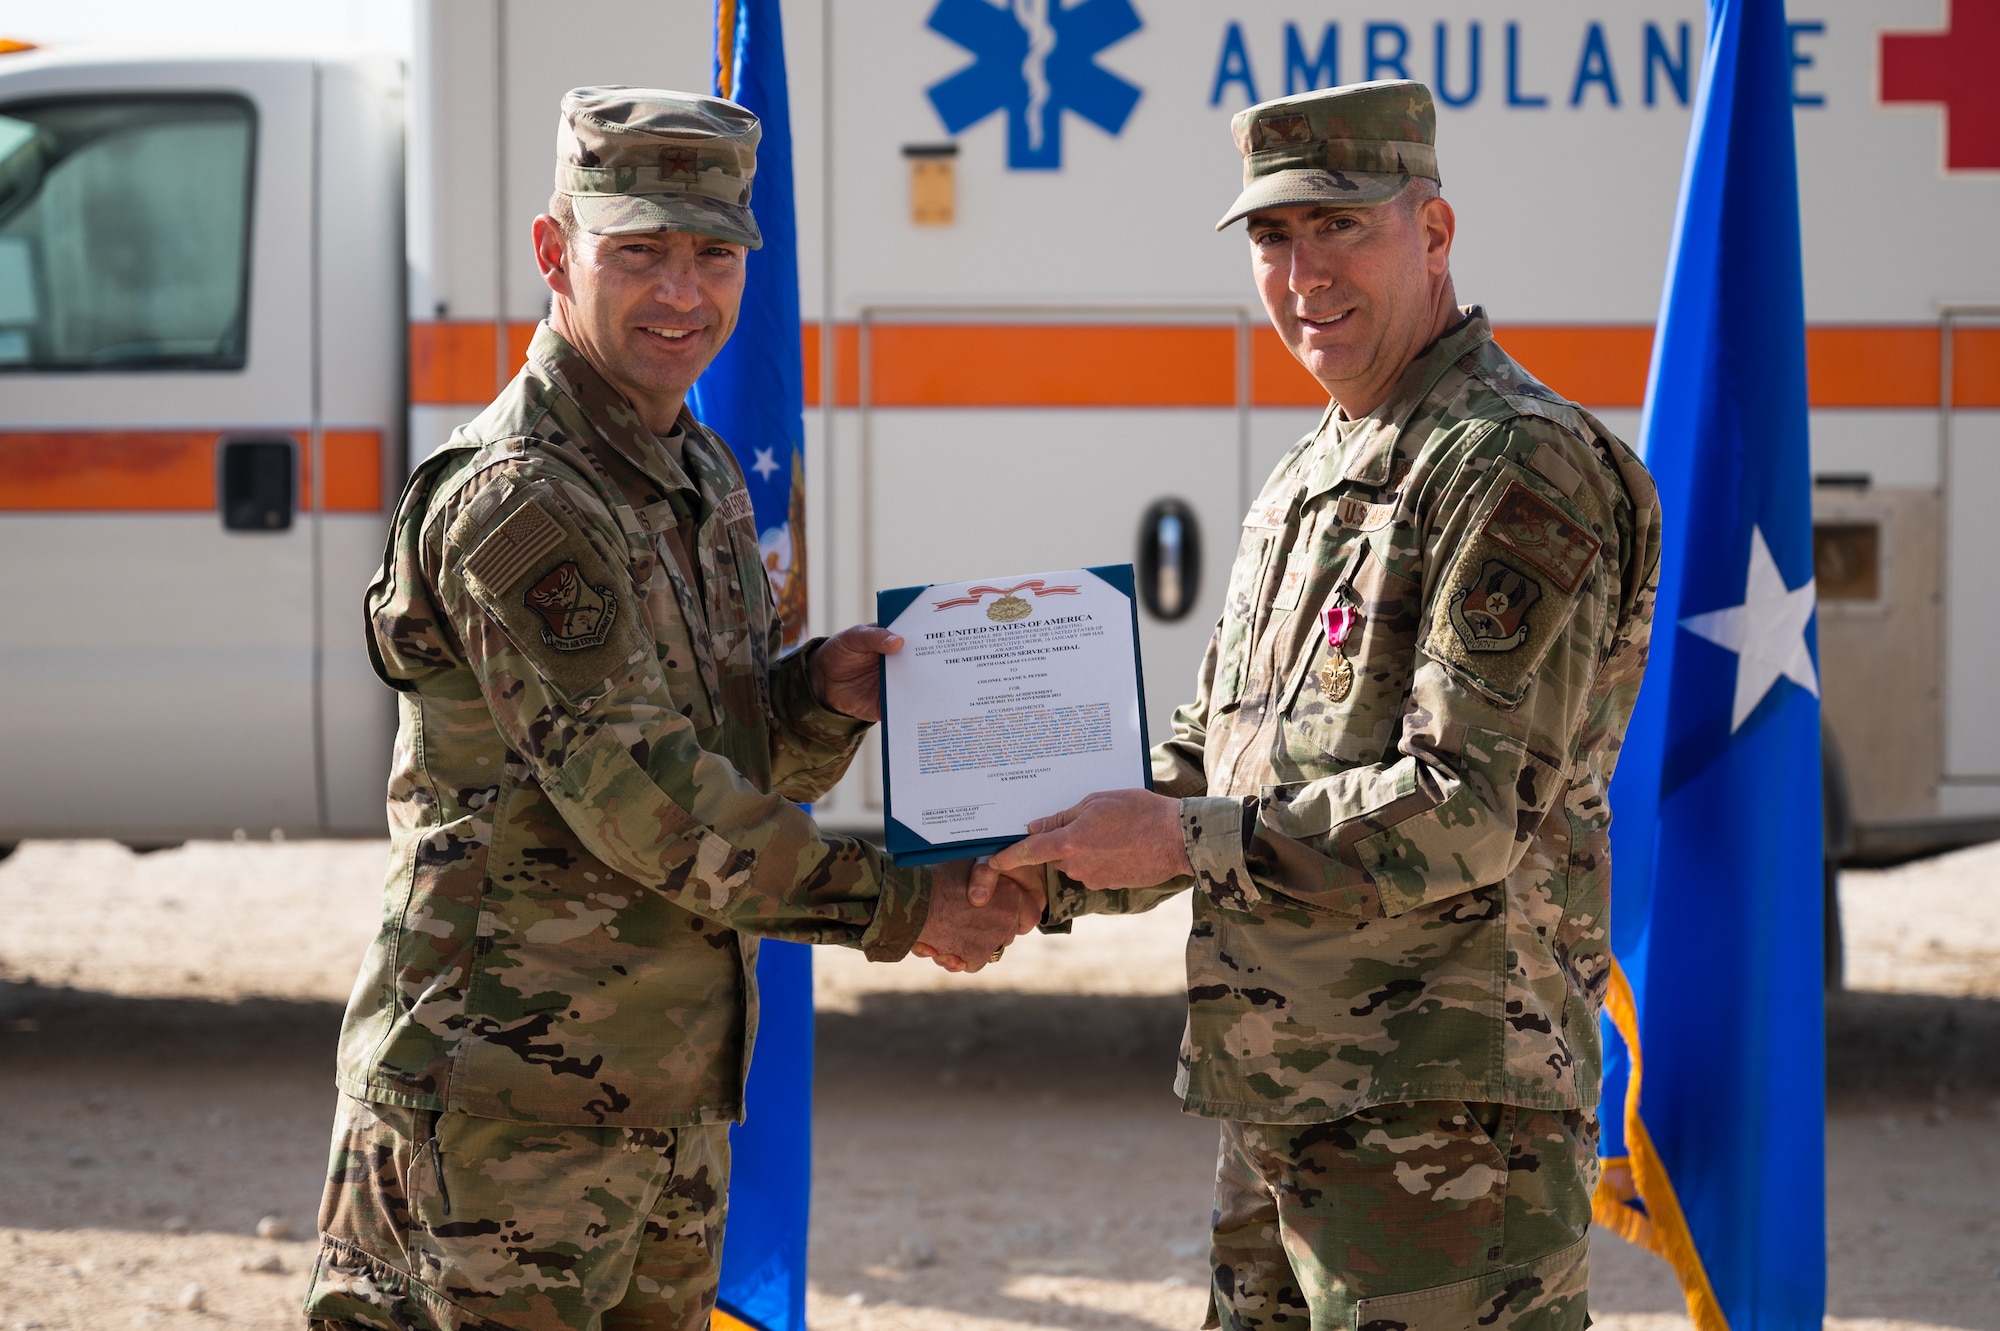 Col. Wayne Peters, right, outgoing 378th Expeditionary Medical Group commander, receives the Meritorious Service Medal from Brig. Gen. Robert Davis, left, 378th Air Expeditionary Wing commander, during the 378th EMDG change of command ceremony at Prince Sultan Air Base, Kingdom of Saudi Arabia, Nov. 9, 2021. The Meritorious Service Medal is awarded to members of the armed services who distinguish themselves by outstanding service to the United States. (U.S. Air Force photo by Senior Airman Jacob B. Wrightsman)